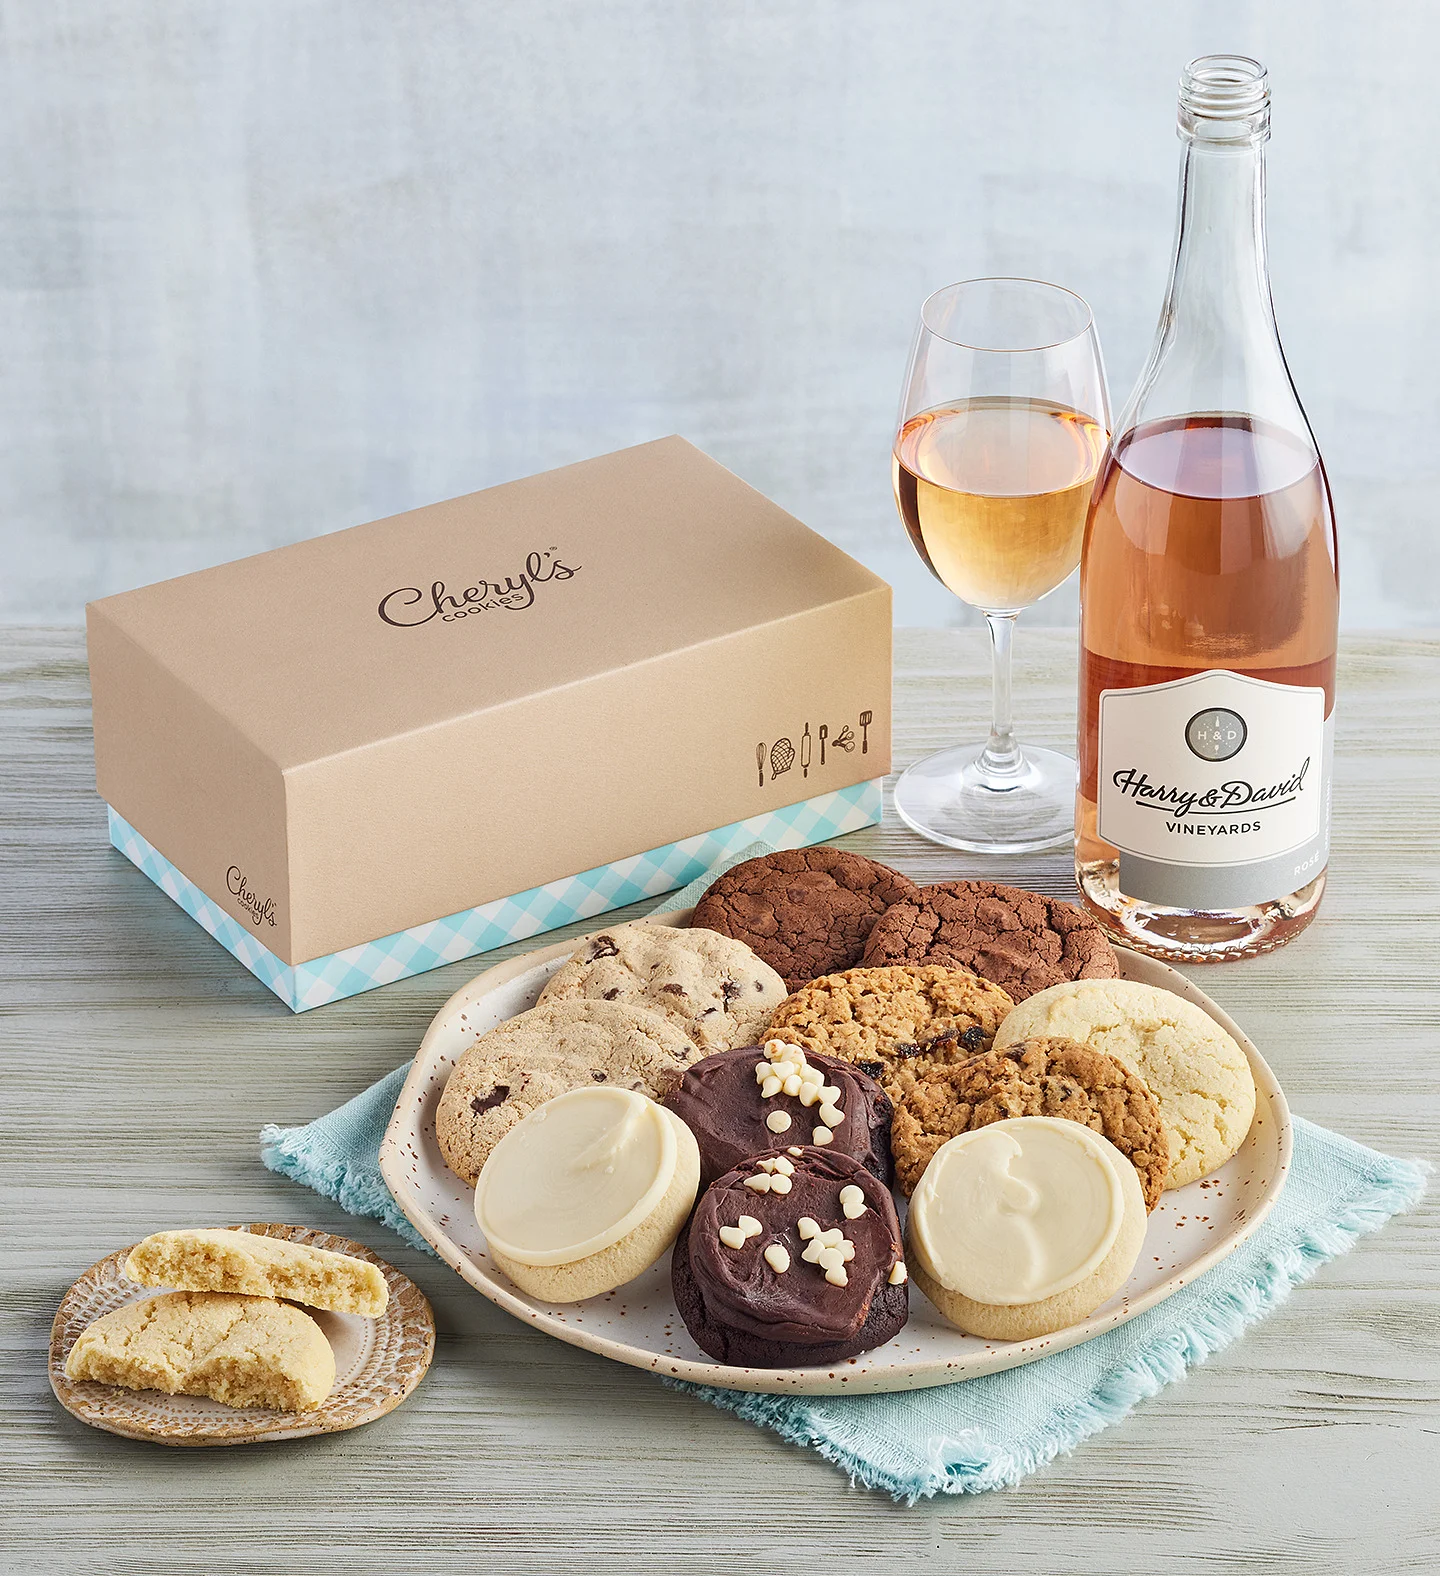 wine ice cream pairings buttercream frosted cookies with rose wine